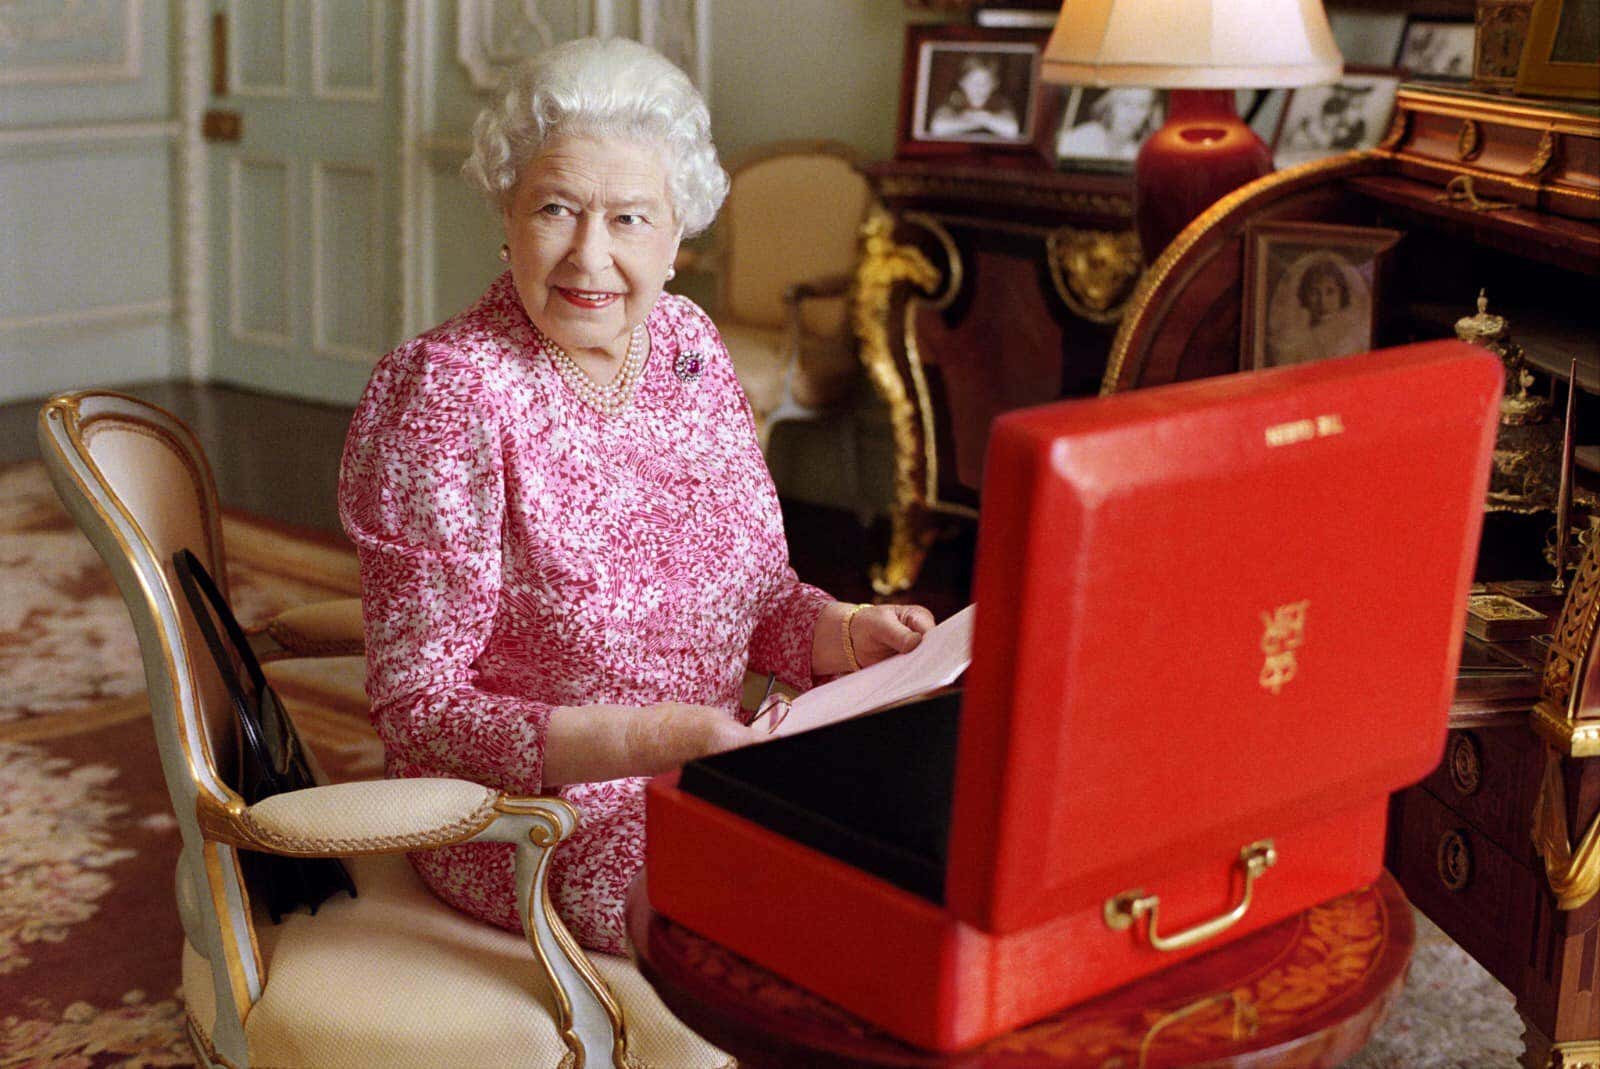 Queen Elizabeth, Citing 'Episodic Mobility Problems,' To Miss Opening Of Parliament For First Time Since 1963